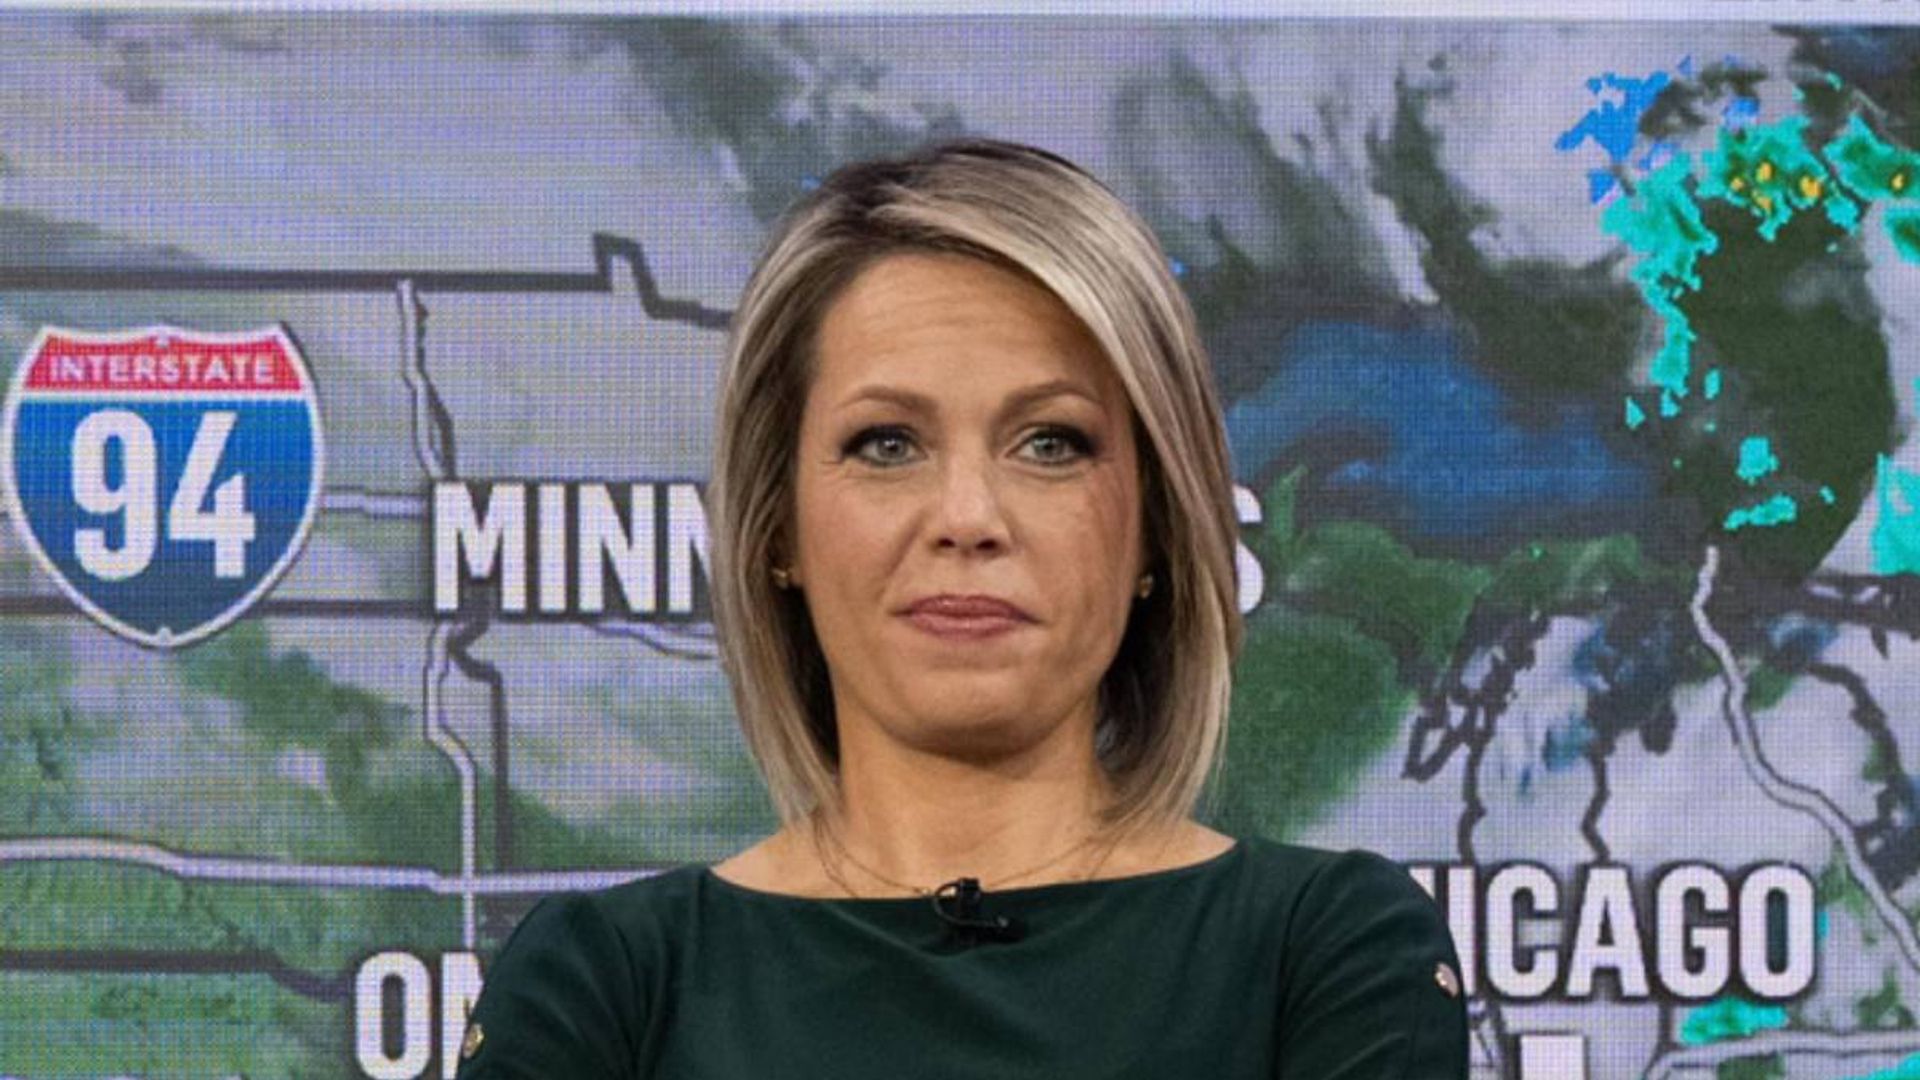 Dylan Dreyer inundated with support following mistake live on-air - details